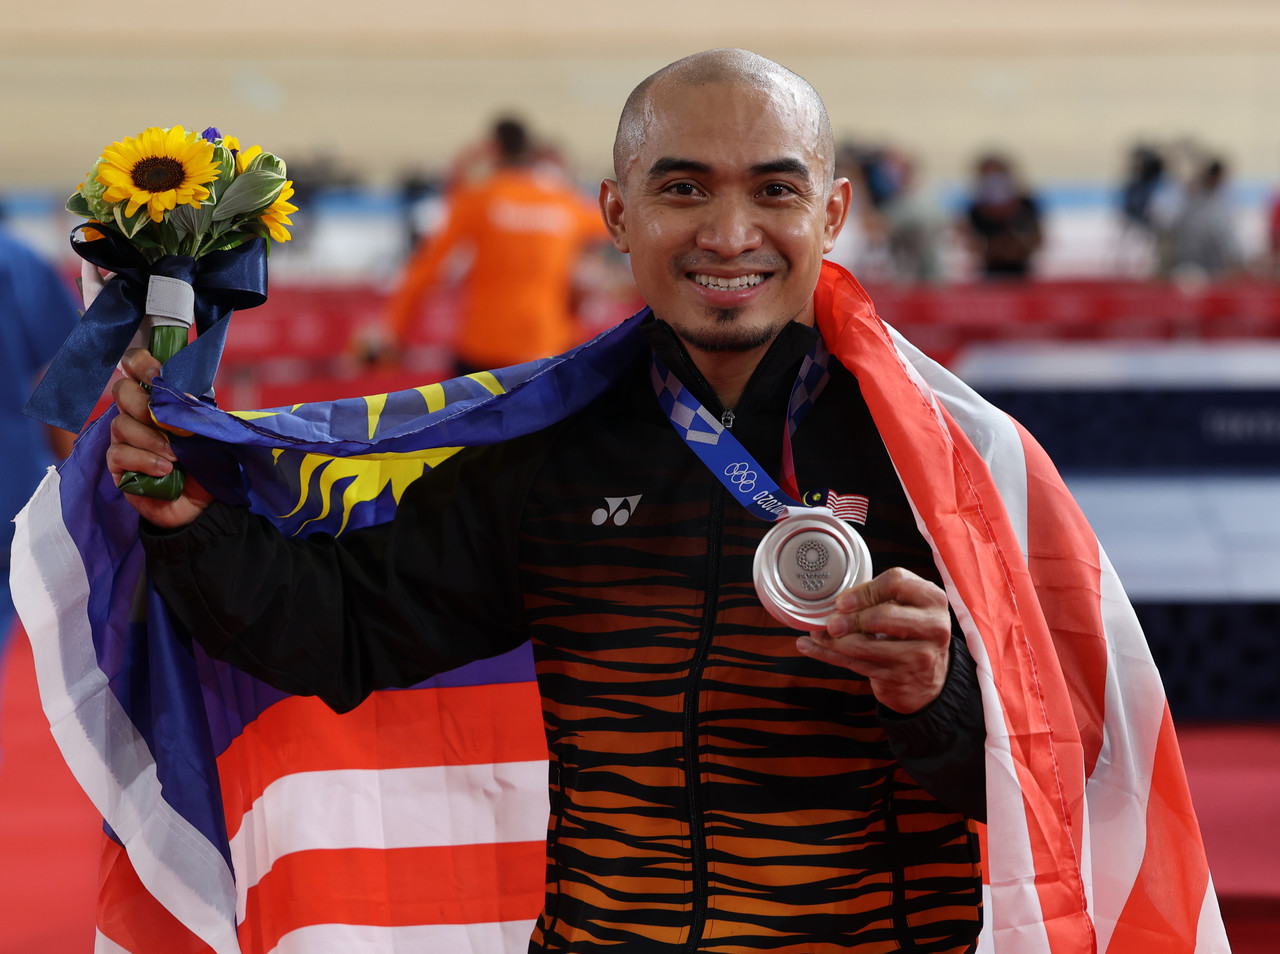 Azizulhasni wins silver for Malaysia in men’s keirin at Tokyo Olympics